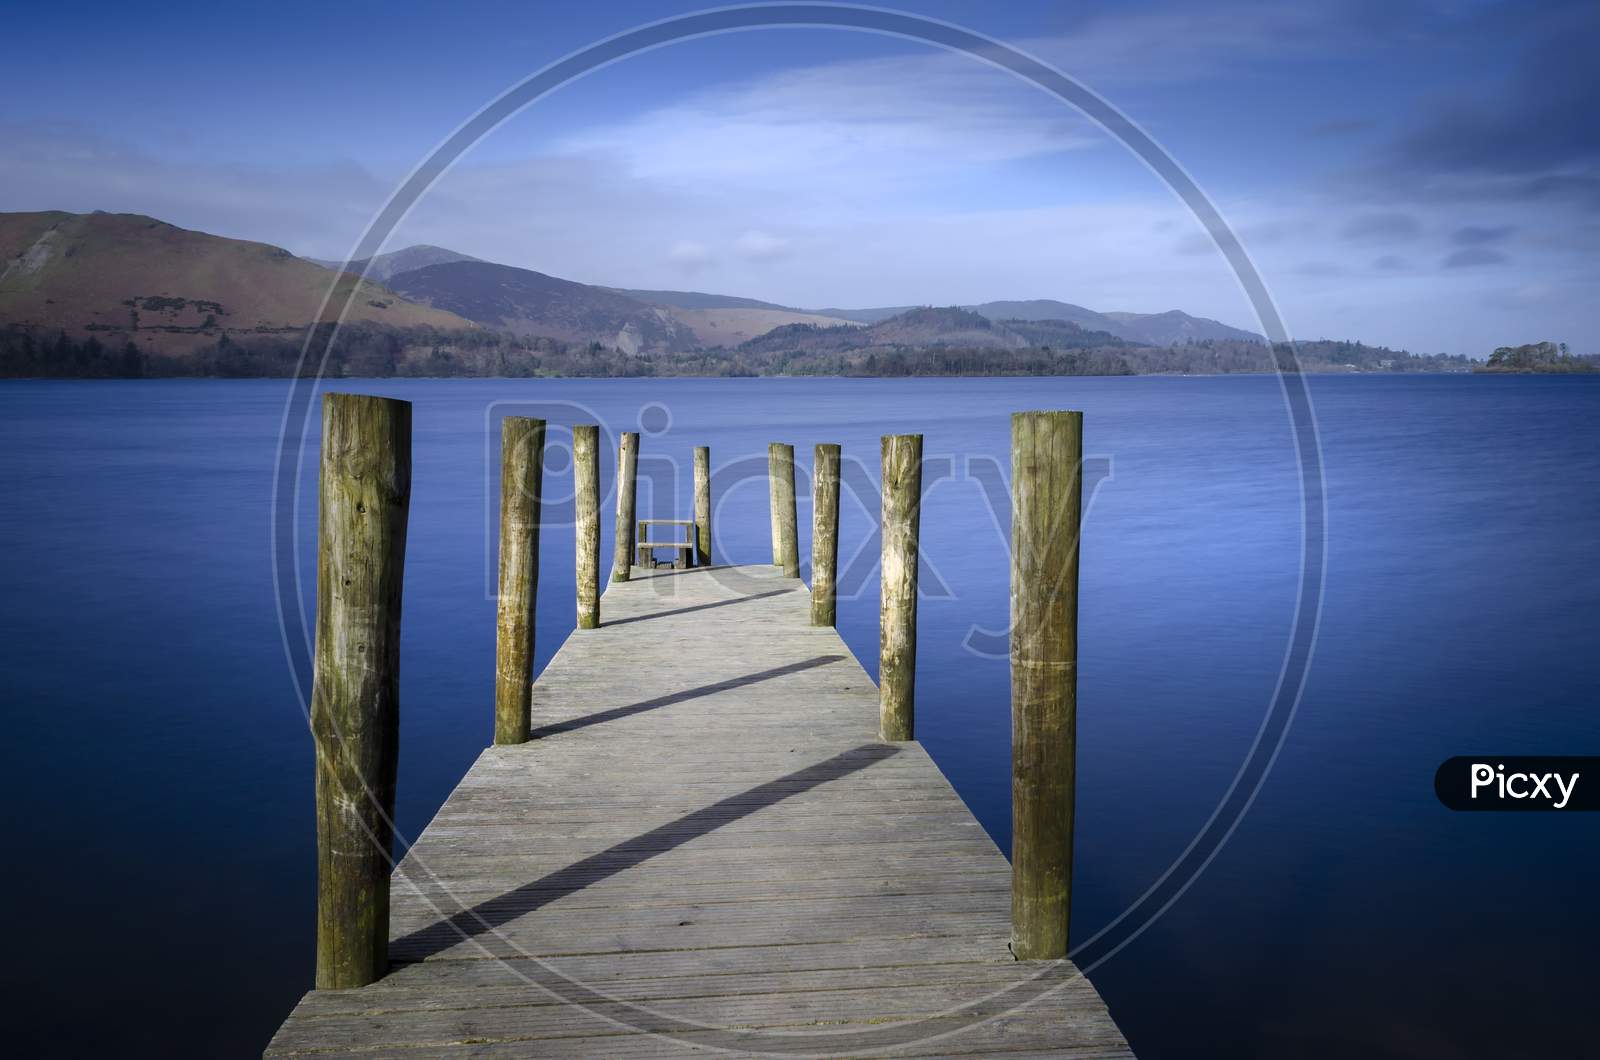 A Jetty on Derwentwater in the Lake district National park England.